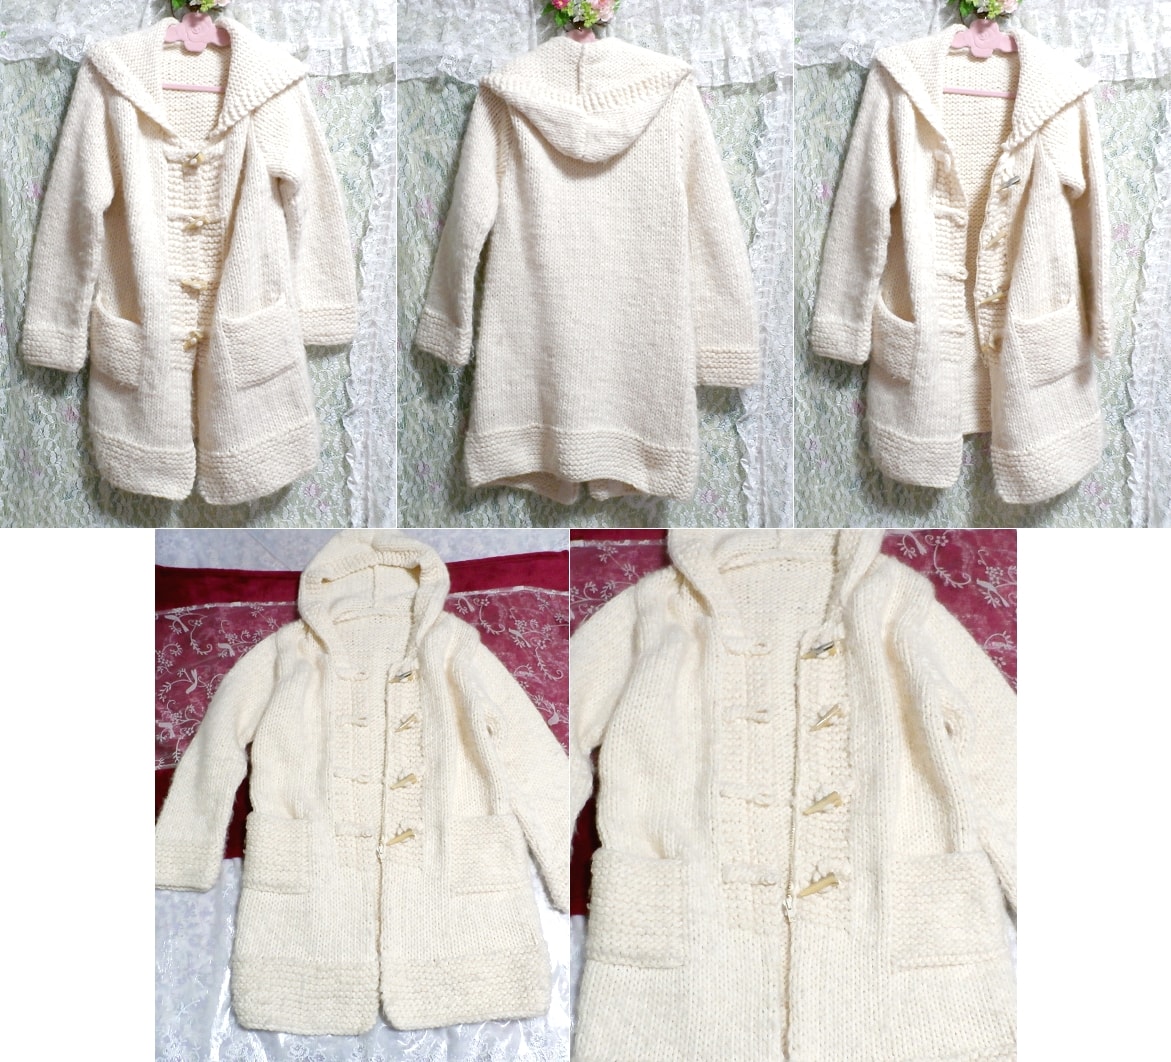 Floral white knitted sweater style seashell button hooded thick cardigan outerwear, ladies' fashion, cardigan, l size